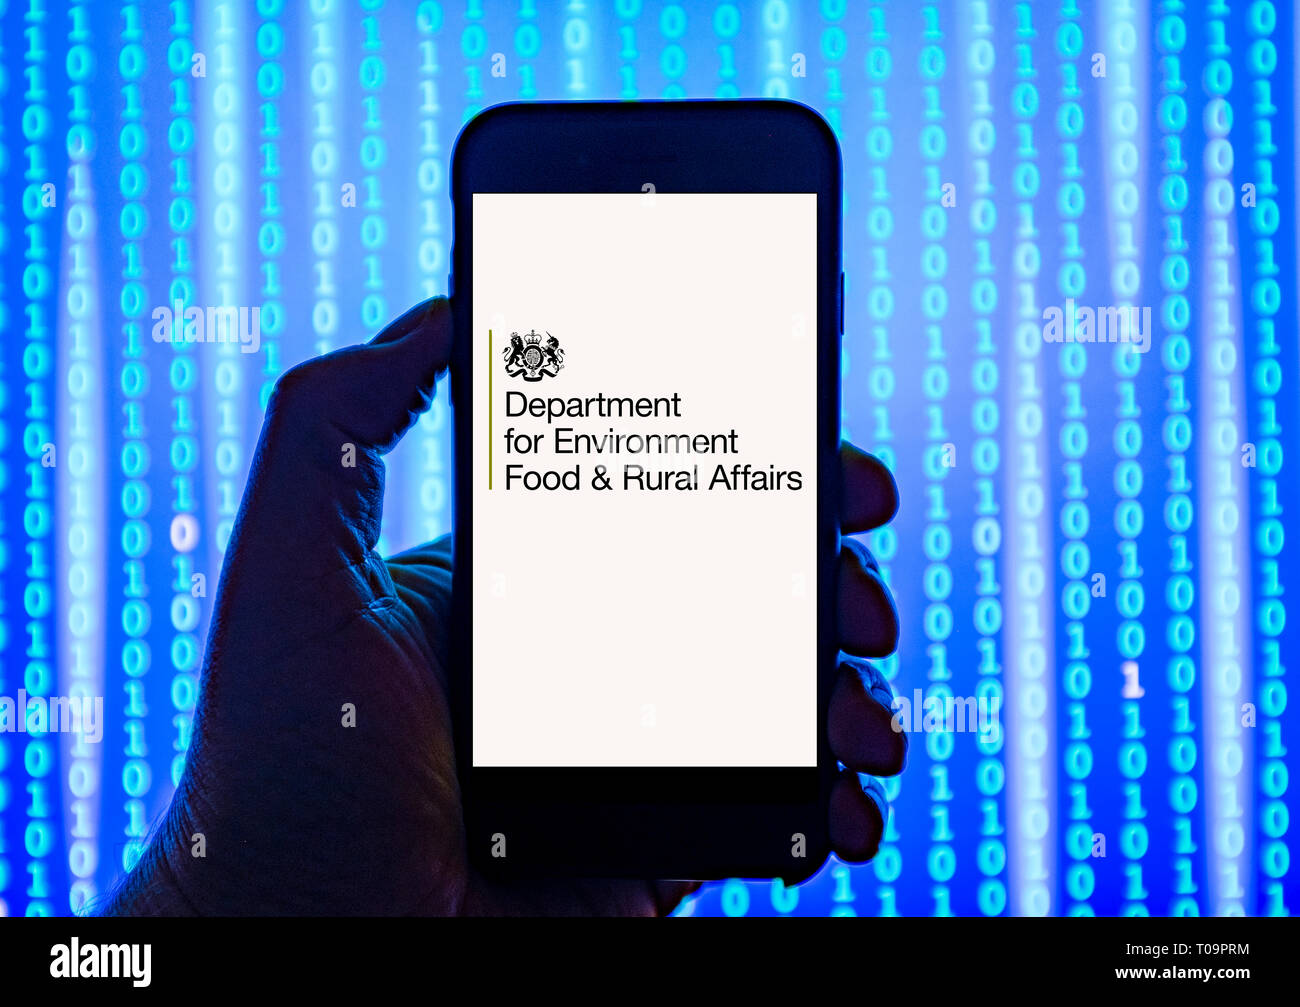 Person holding smart phone with Department for Environment, Food & Rural Affairs logo displayed on the screen. Stock Photo